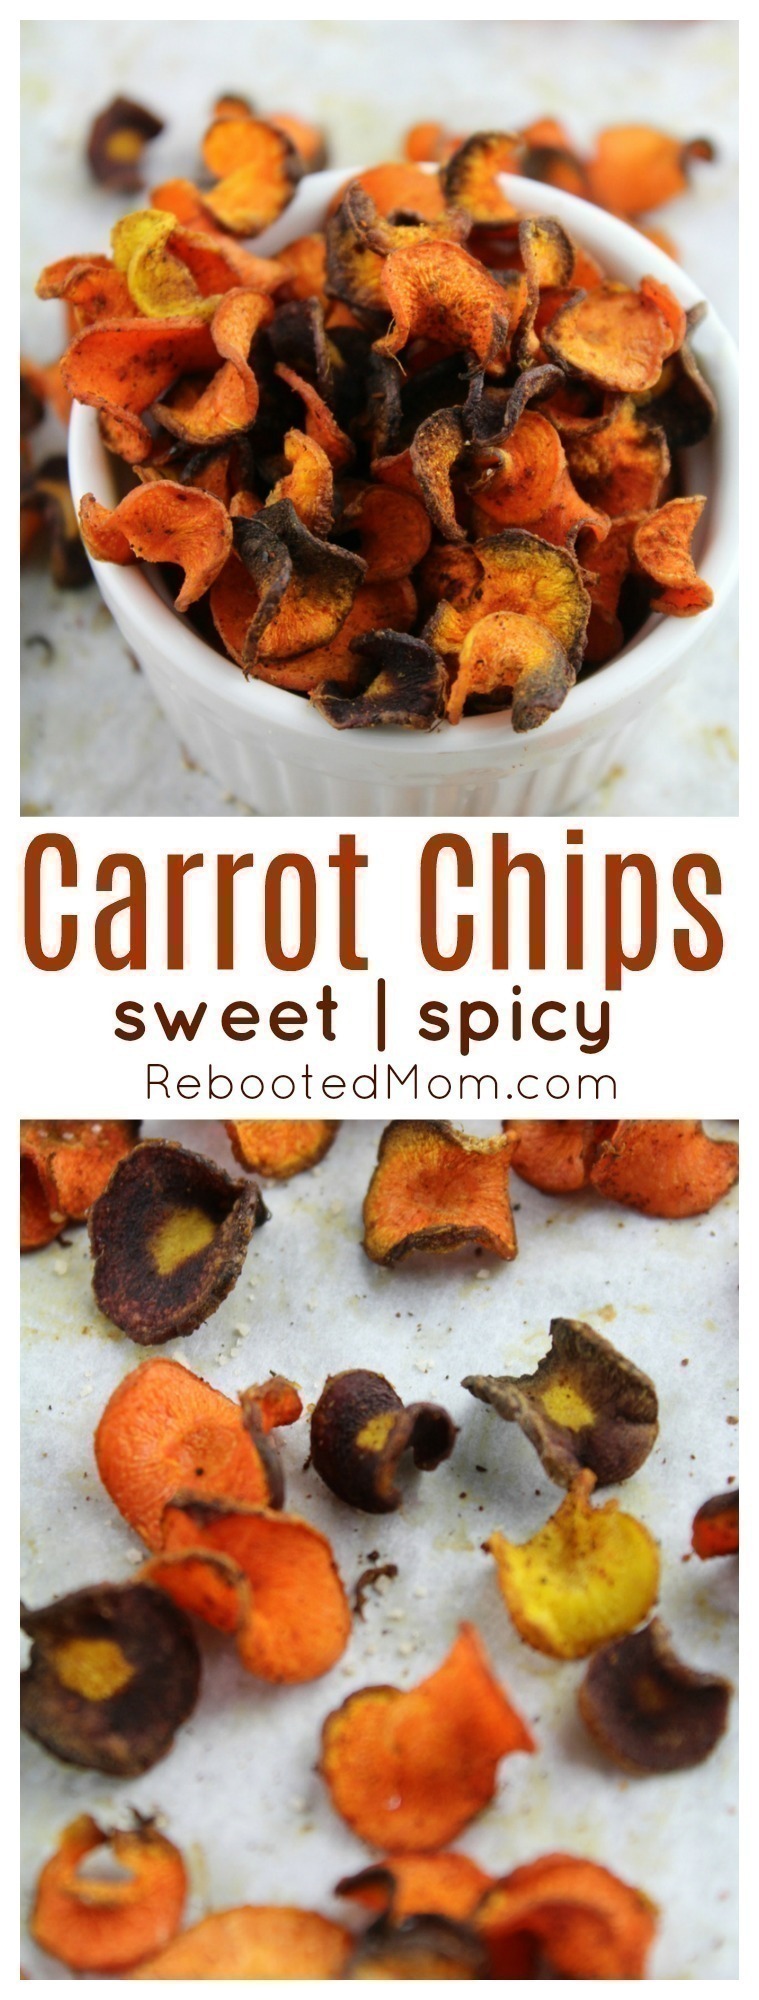 A light and healthy carrot chip spiced with cinnamon or cayenne pepper and baked until crispy.